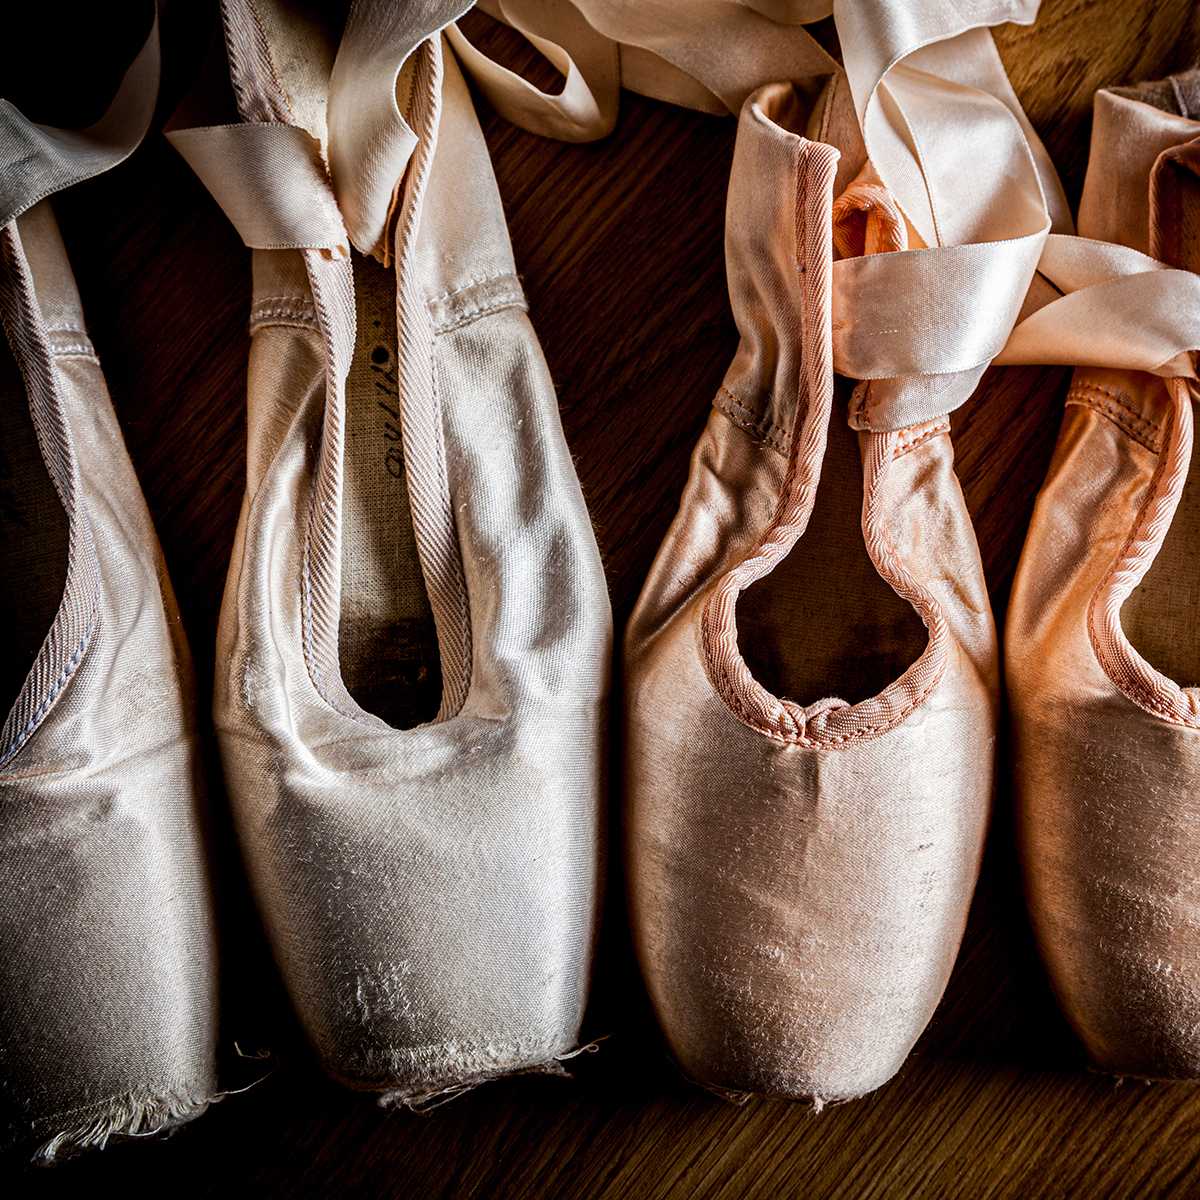 Brown Shoes Throwing Shade At Ballet